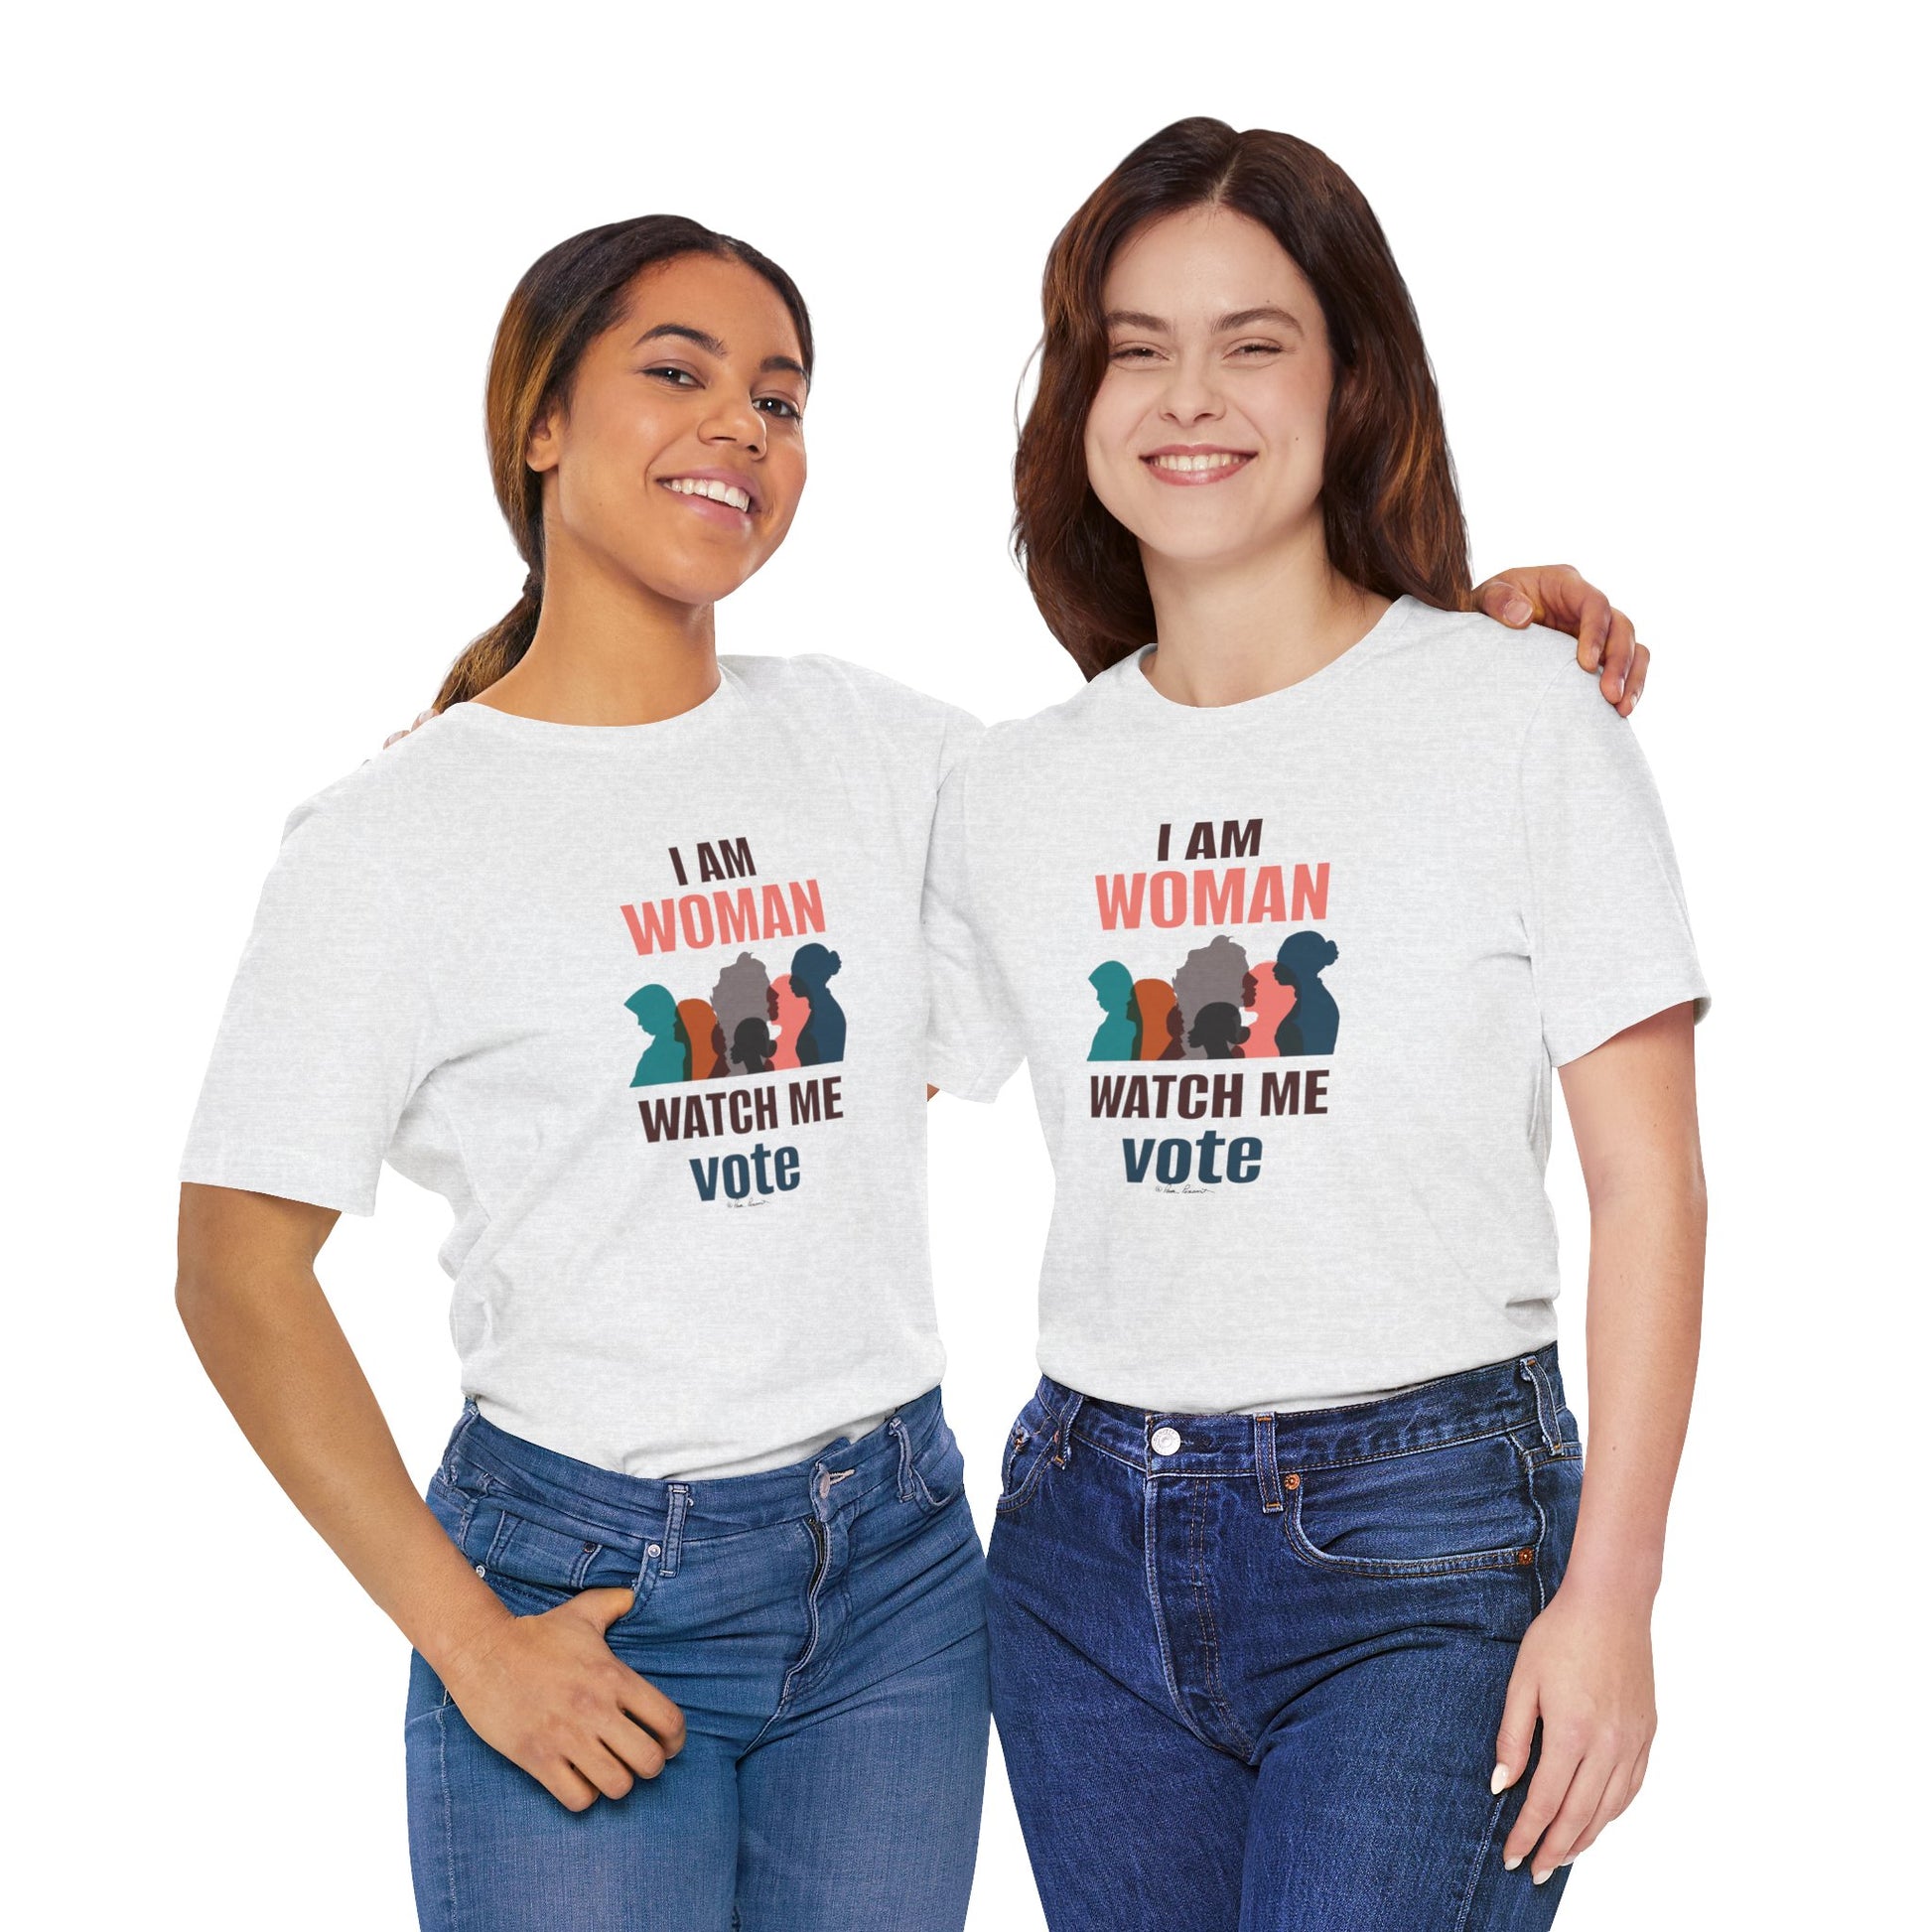 Two women smiling, wearing white Printify Bella + Canvas voting women's t-shirts with "i am woman watch me vote" printed on them, standing against a white background.